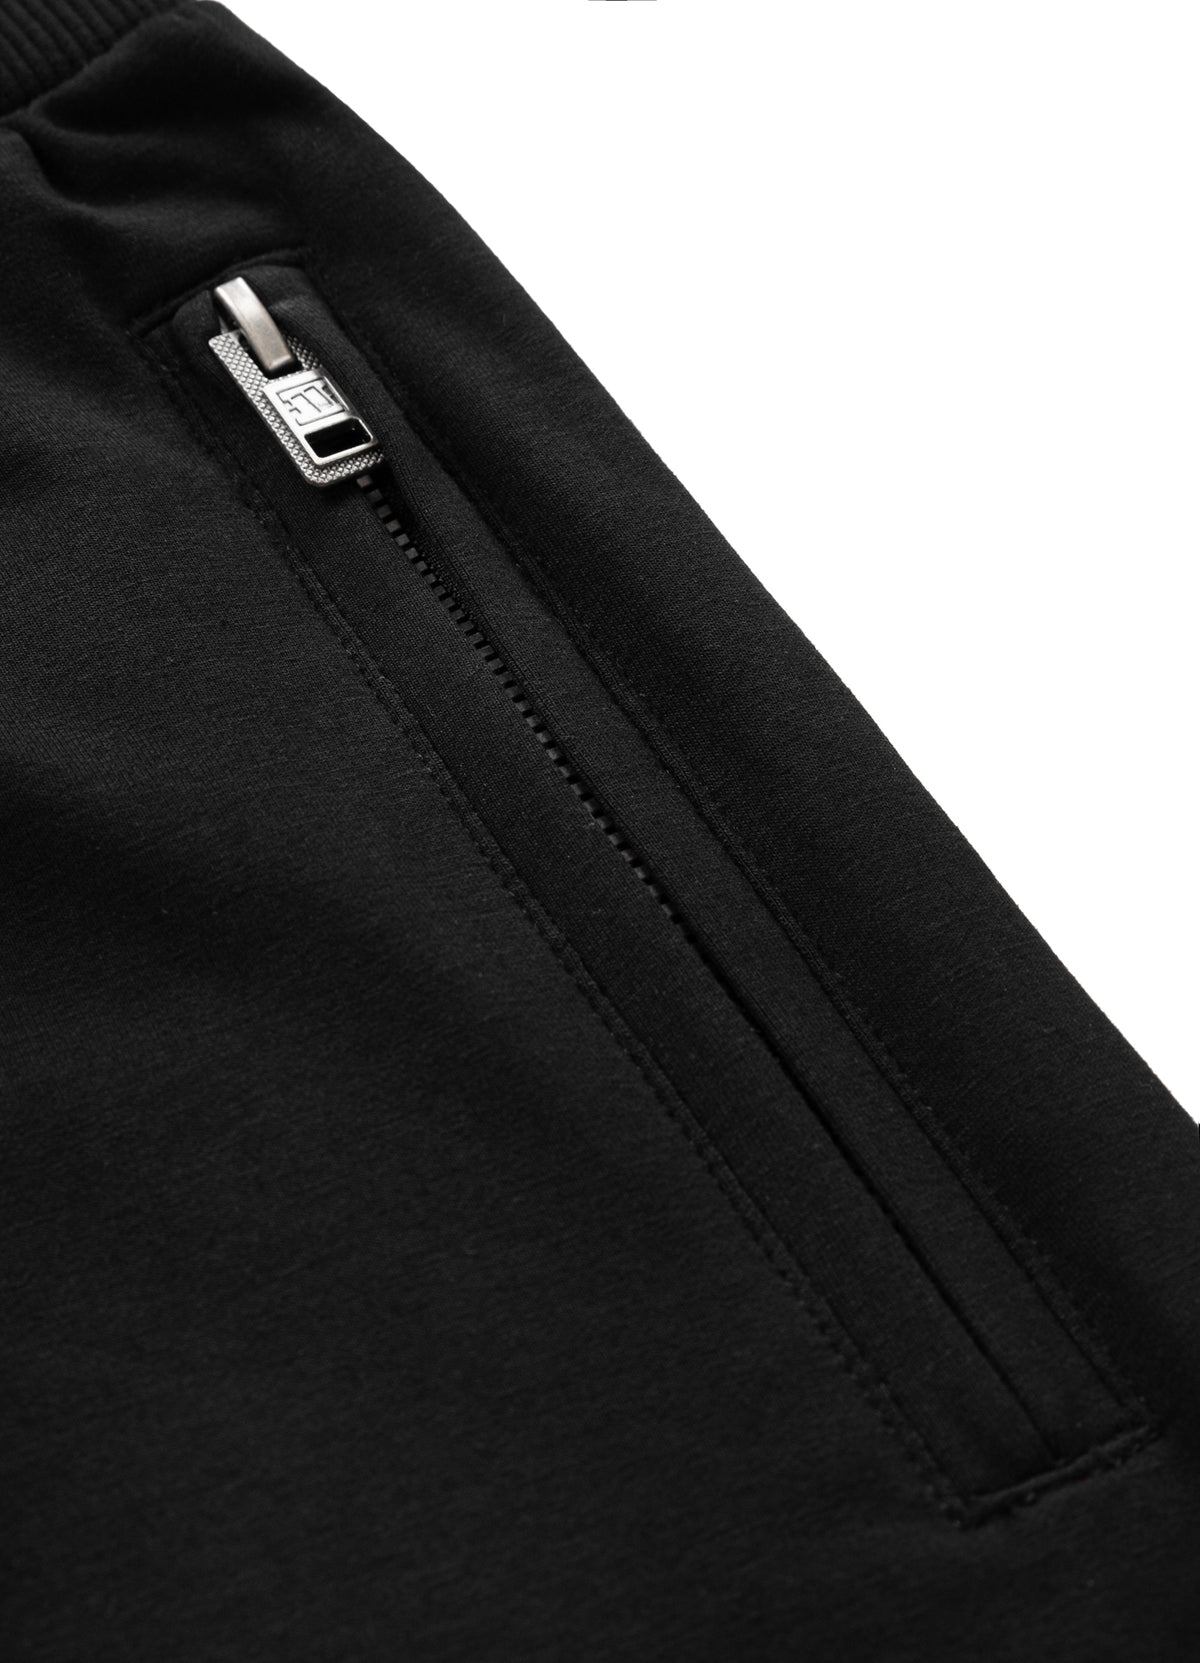 SMALL LOGO FRENCH TERRY 220 Black Shorts.